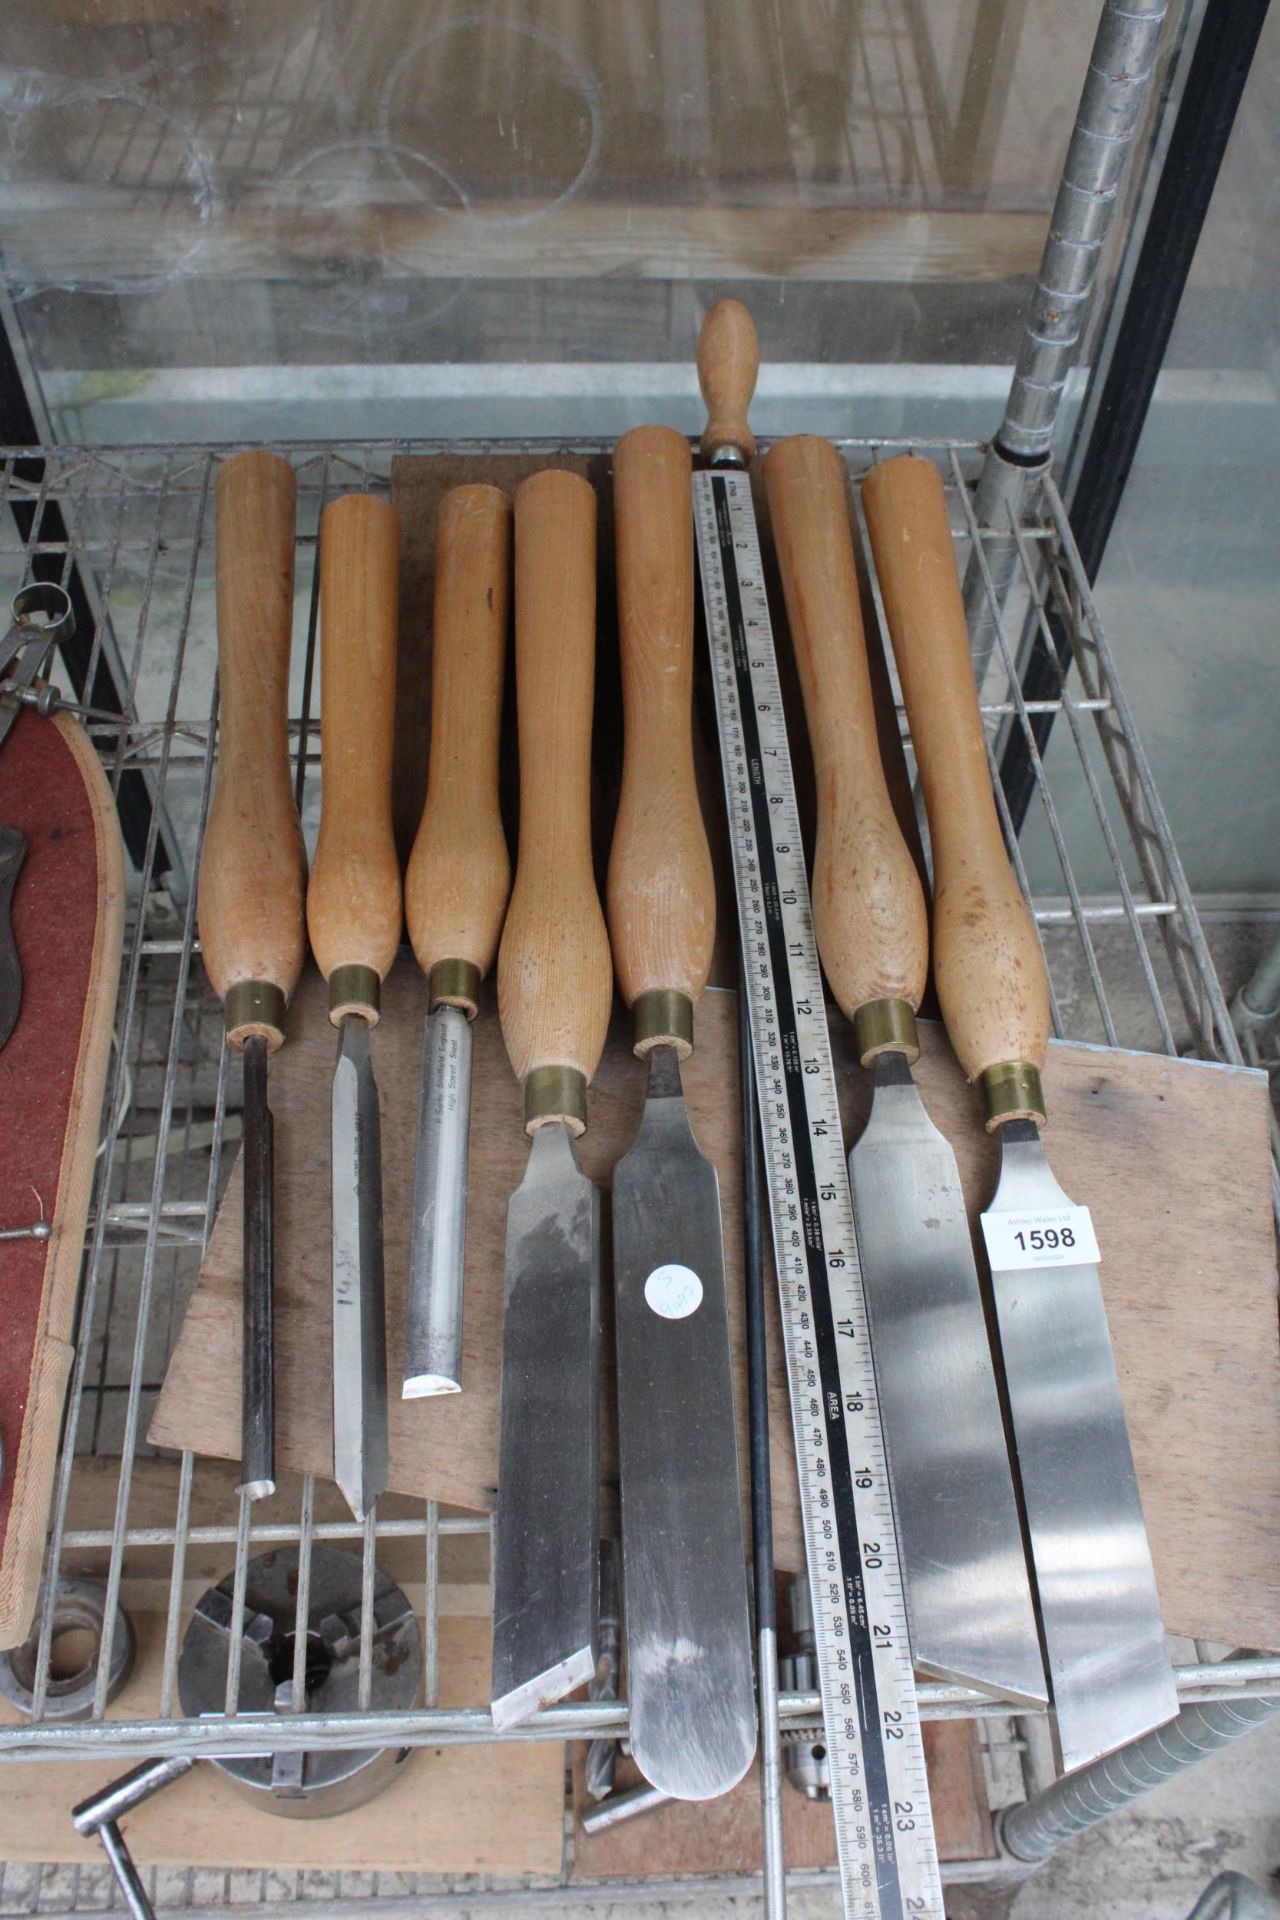 AN ASSORTMENT OF EIGHT LARGE WOODEN HANDLE LATHE TOOLS AND CHISELS - Image 5 of 5